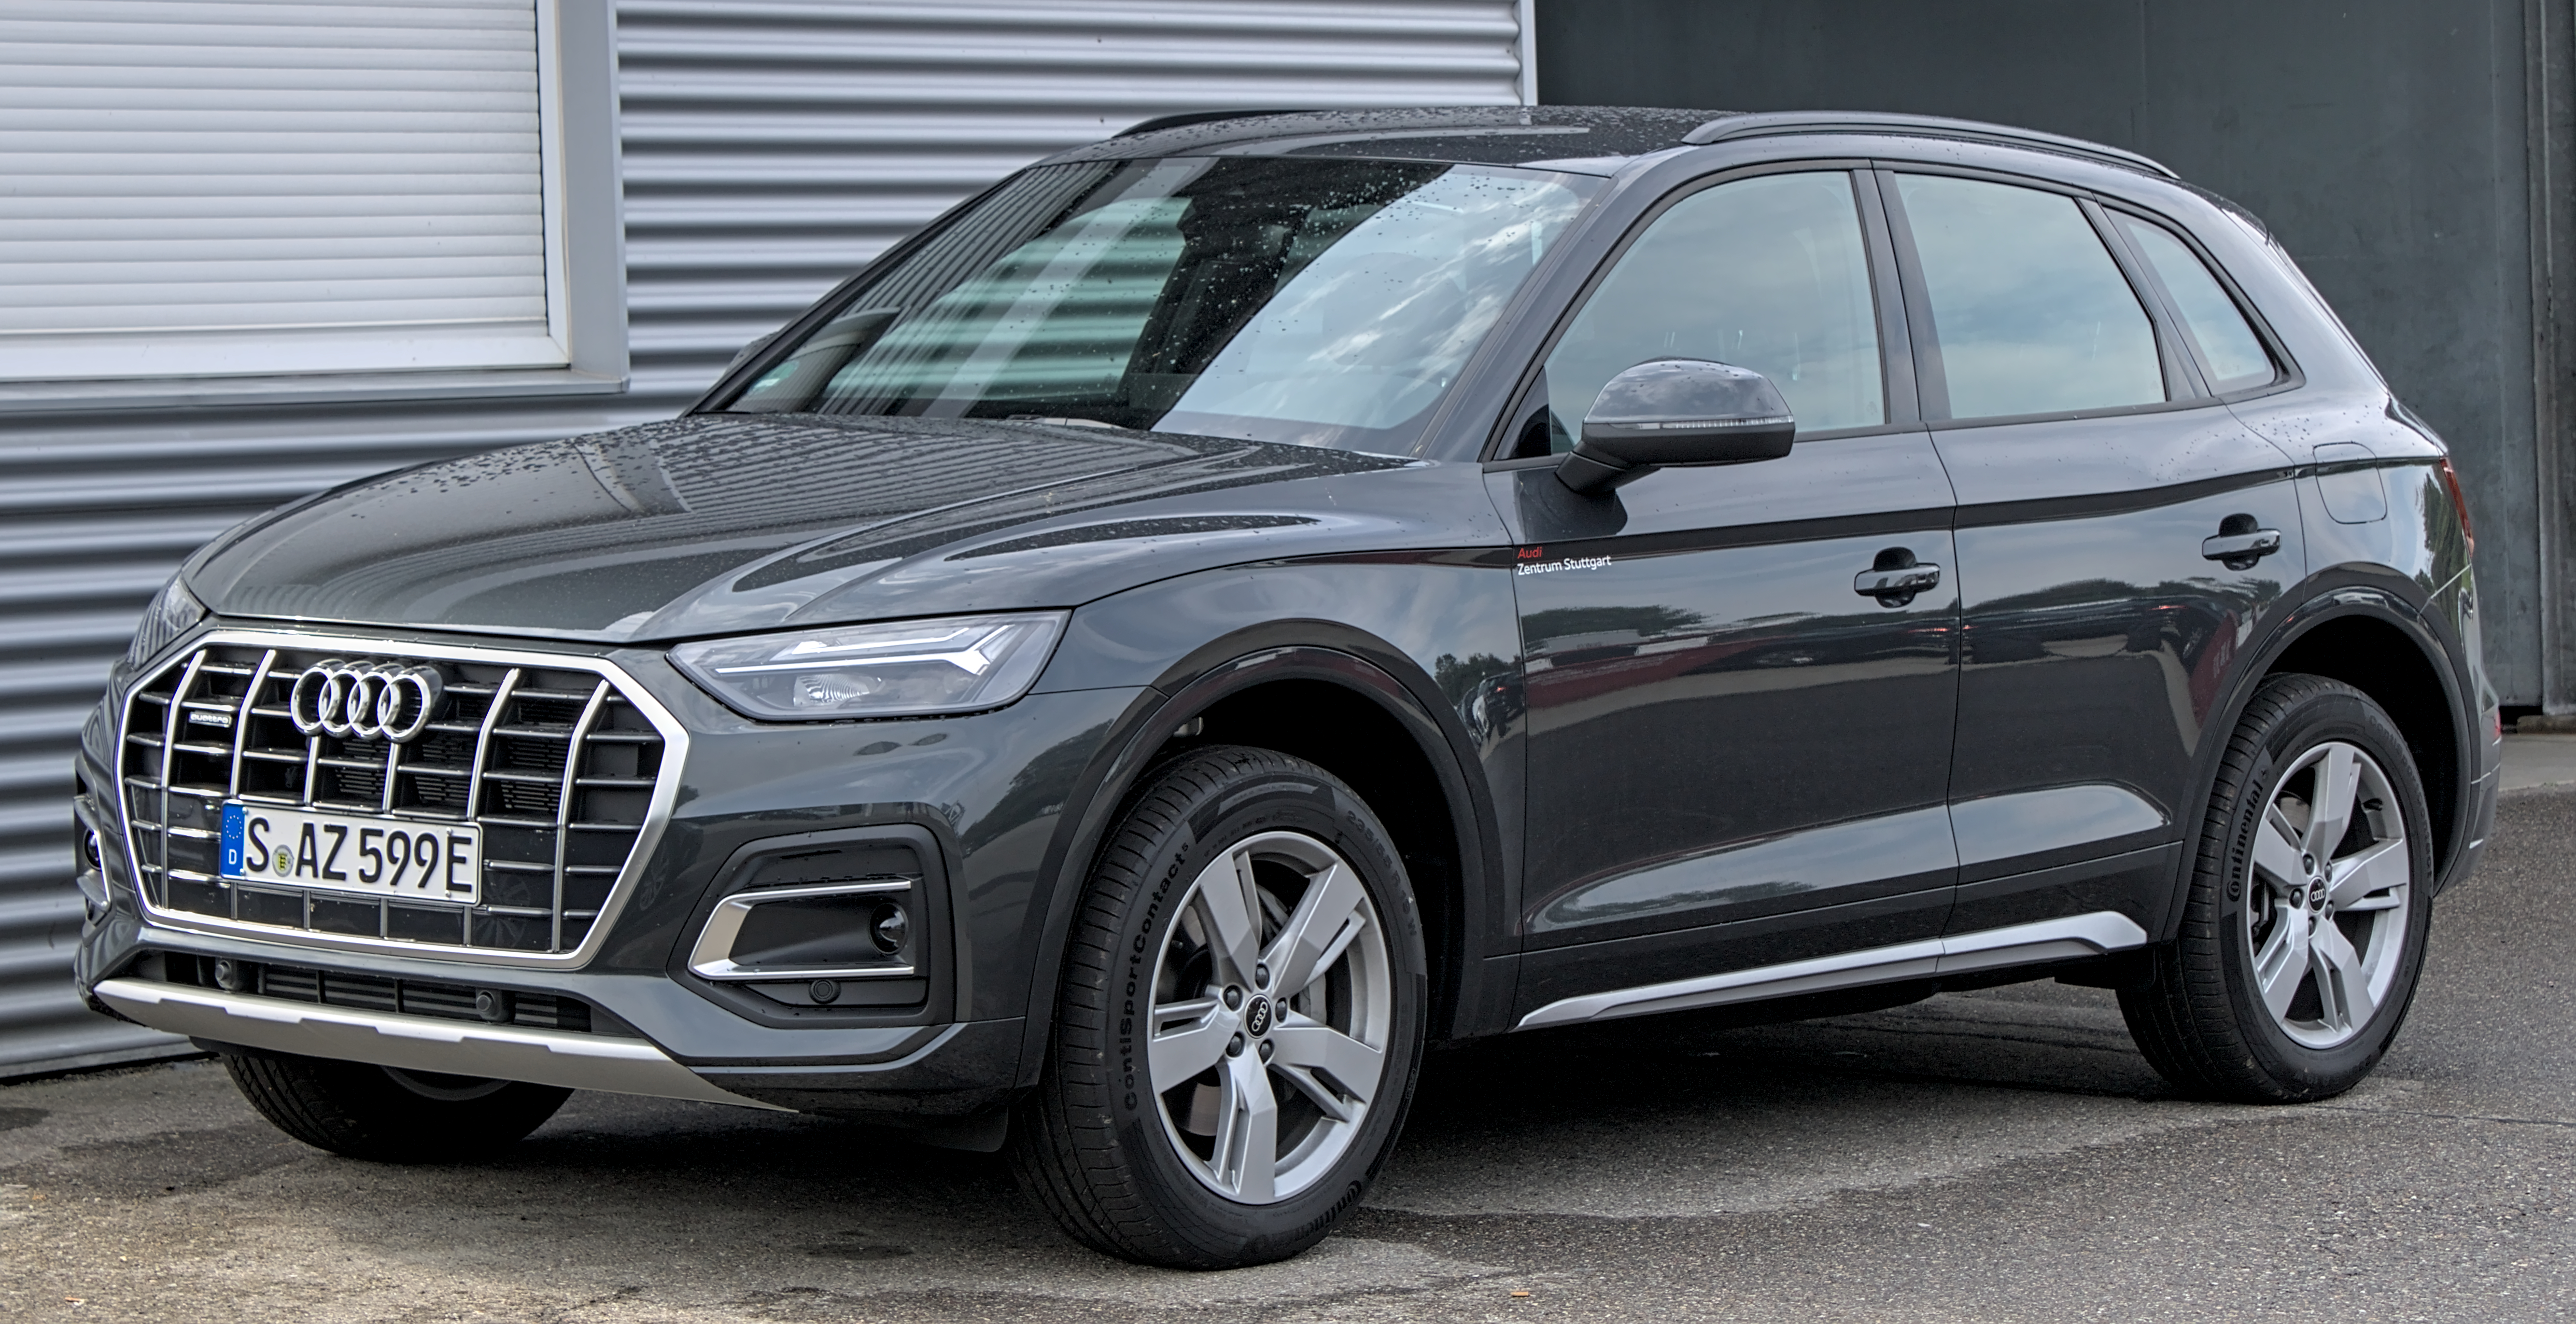 How To Rent A Audi Q5 In Dubai 